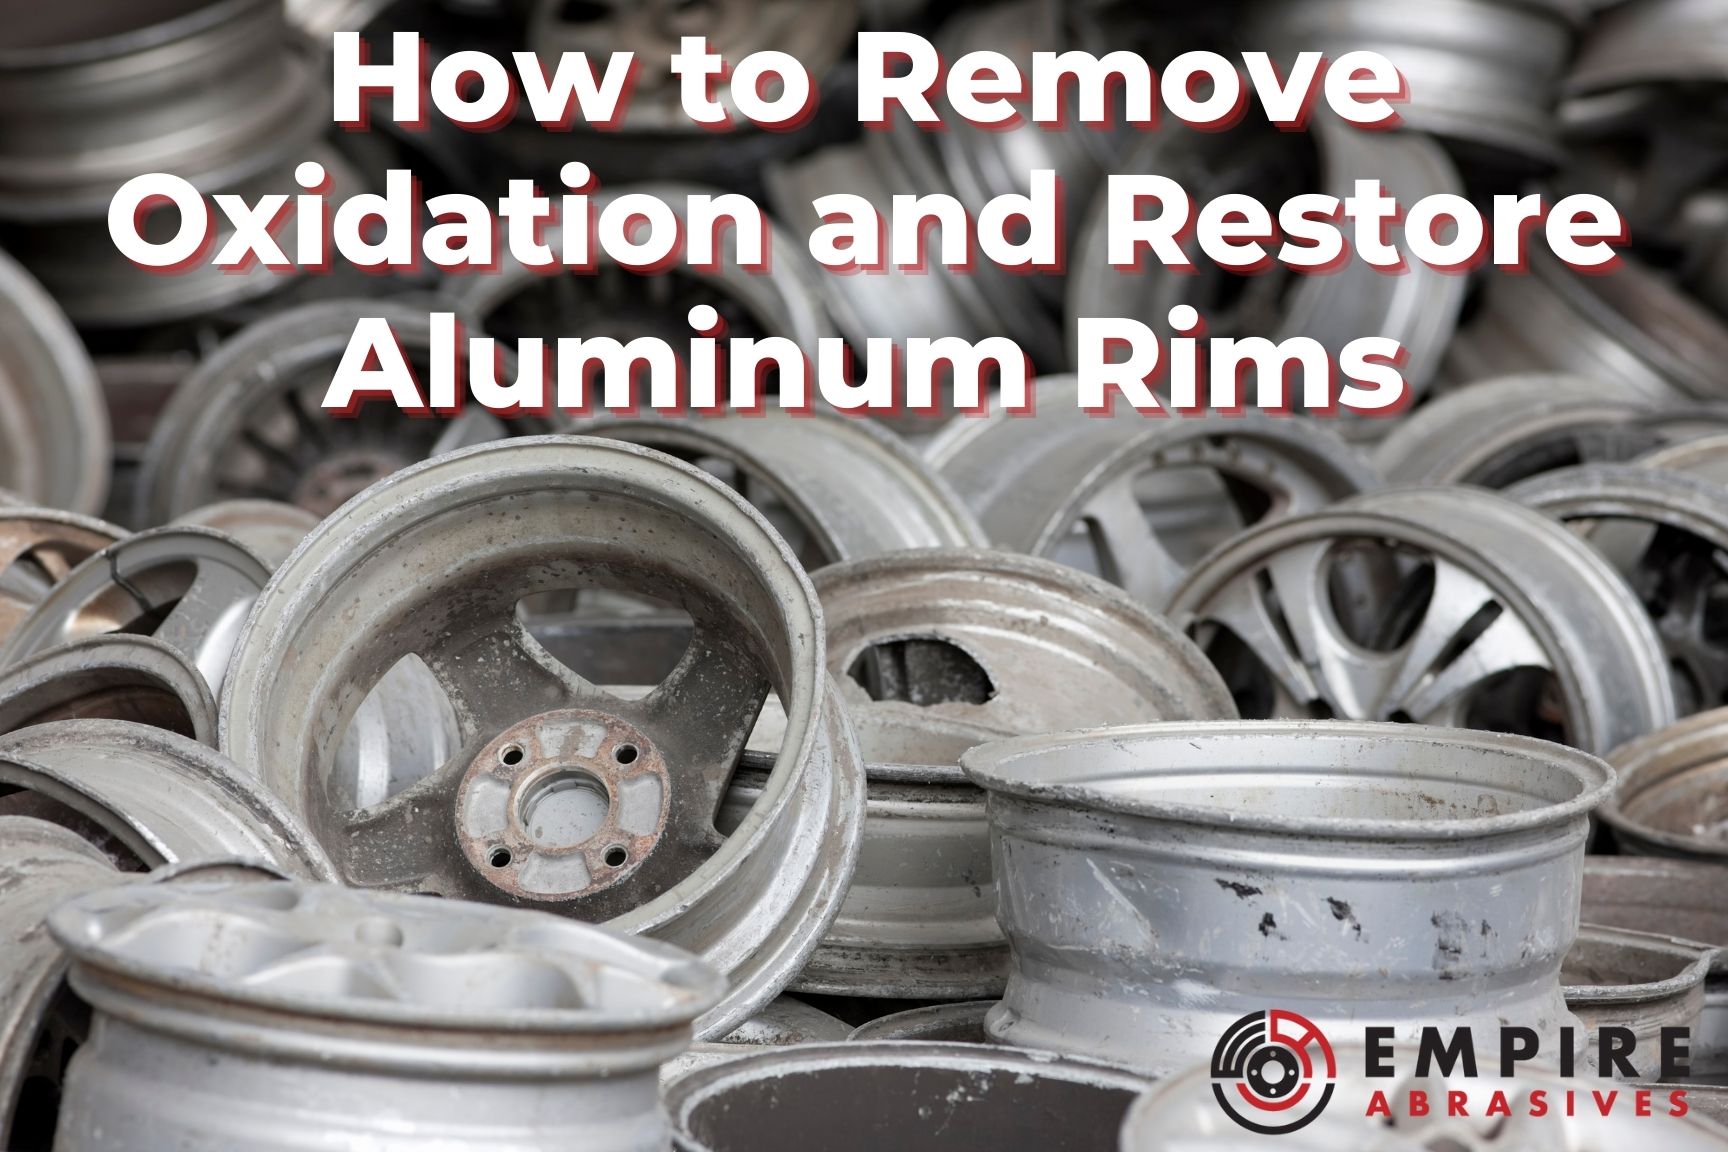 How to Remove Oxidation and Restore Aluminum Rims